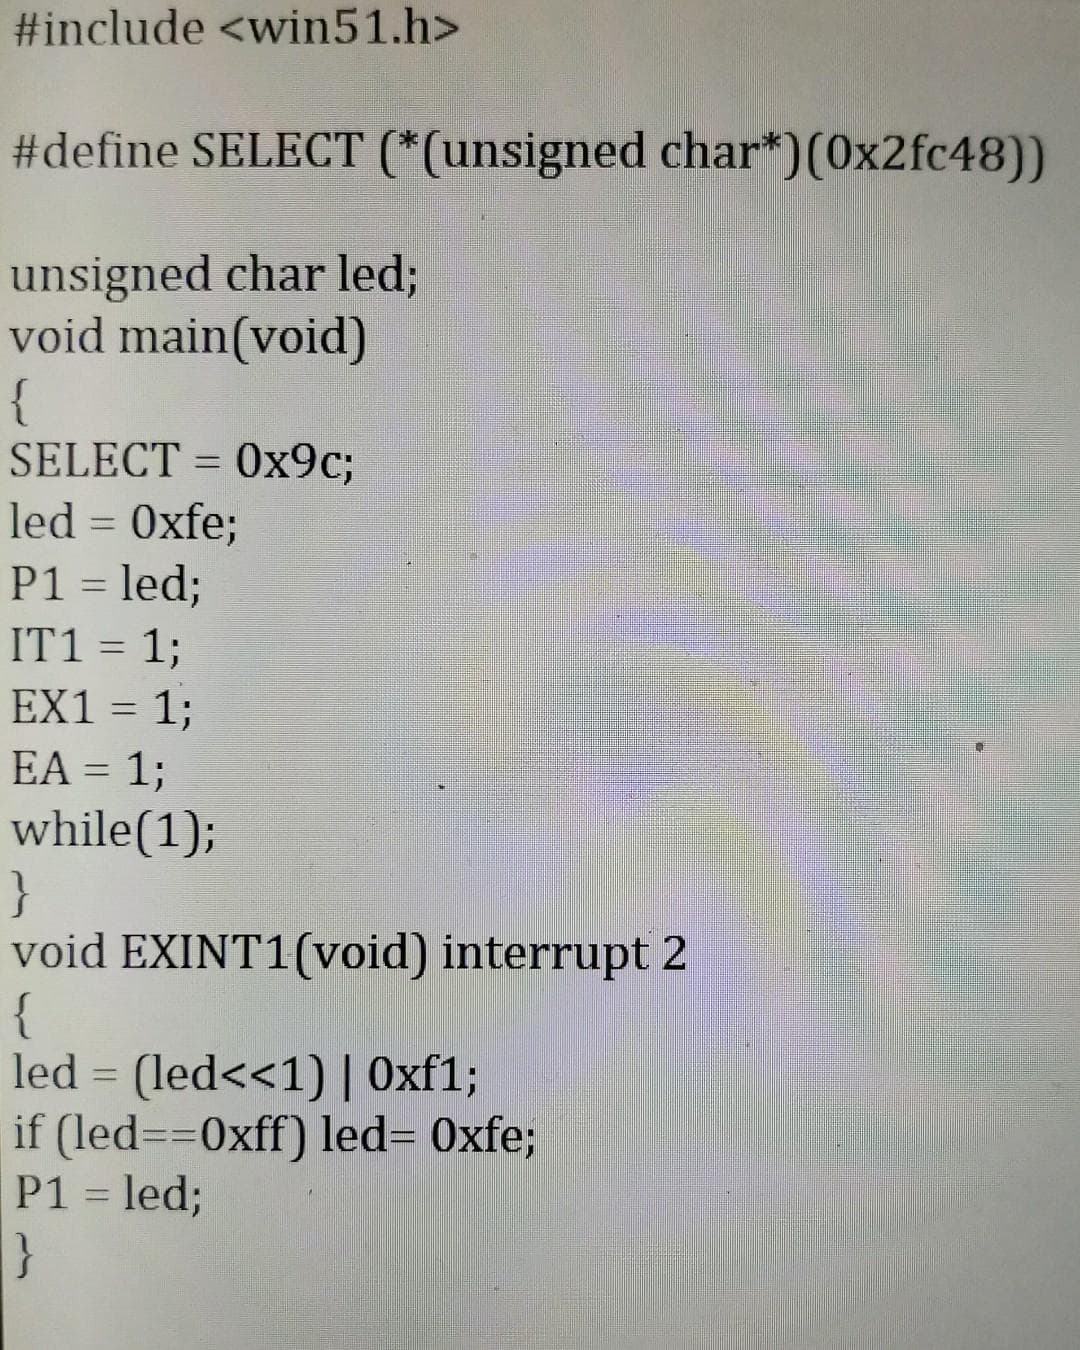 #include <win51.h>
#define SELECT (*(unsigned char*)(0x2fc48))
unsigned char led;
void main(void)
{
SELECT = 0x9c;
led = Oxfe;
P1 = led;
IT1 = 1;
EX1 = 1;
EA = 1;
while(1);
}
void EXINT1(void) interrupt 2
{
led = (led<<1) | Oxf1;
if (led==0xff) led= Oxfe;
P1 = led;
}